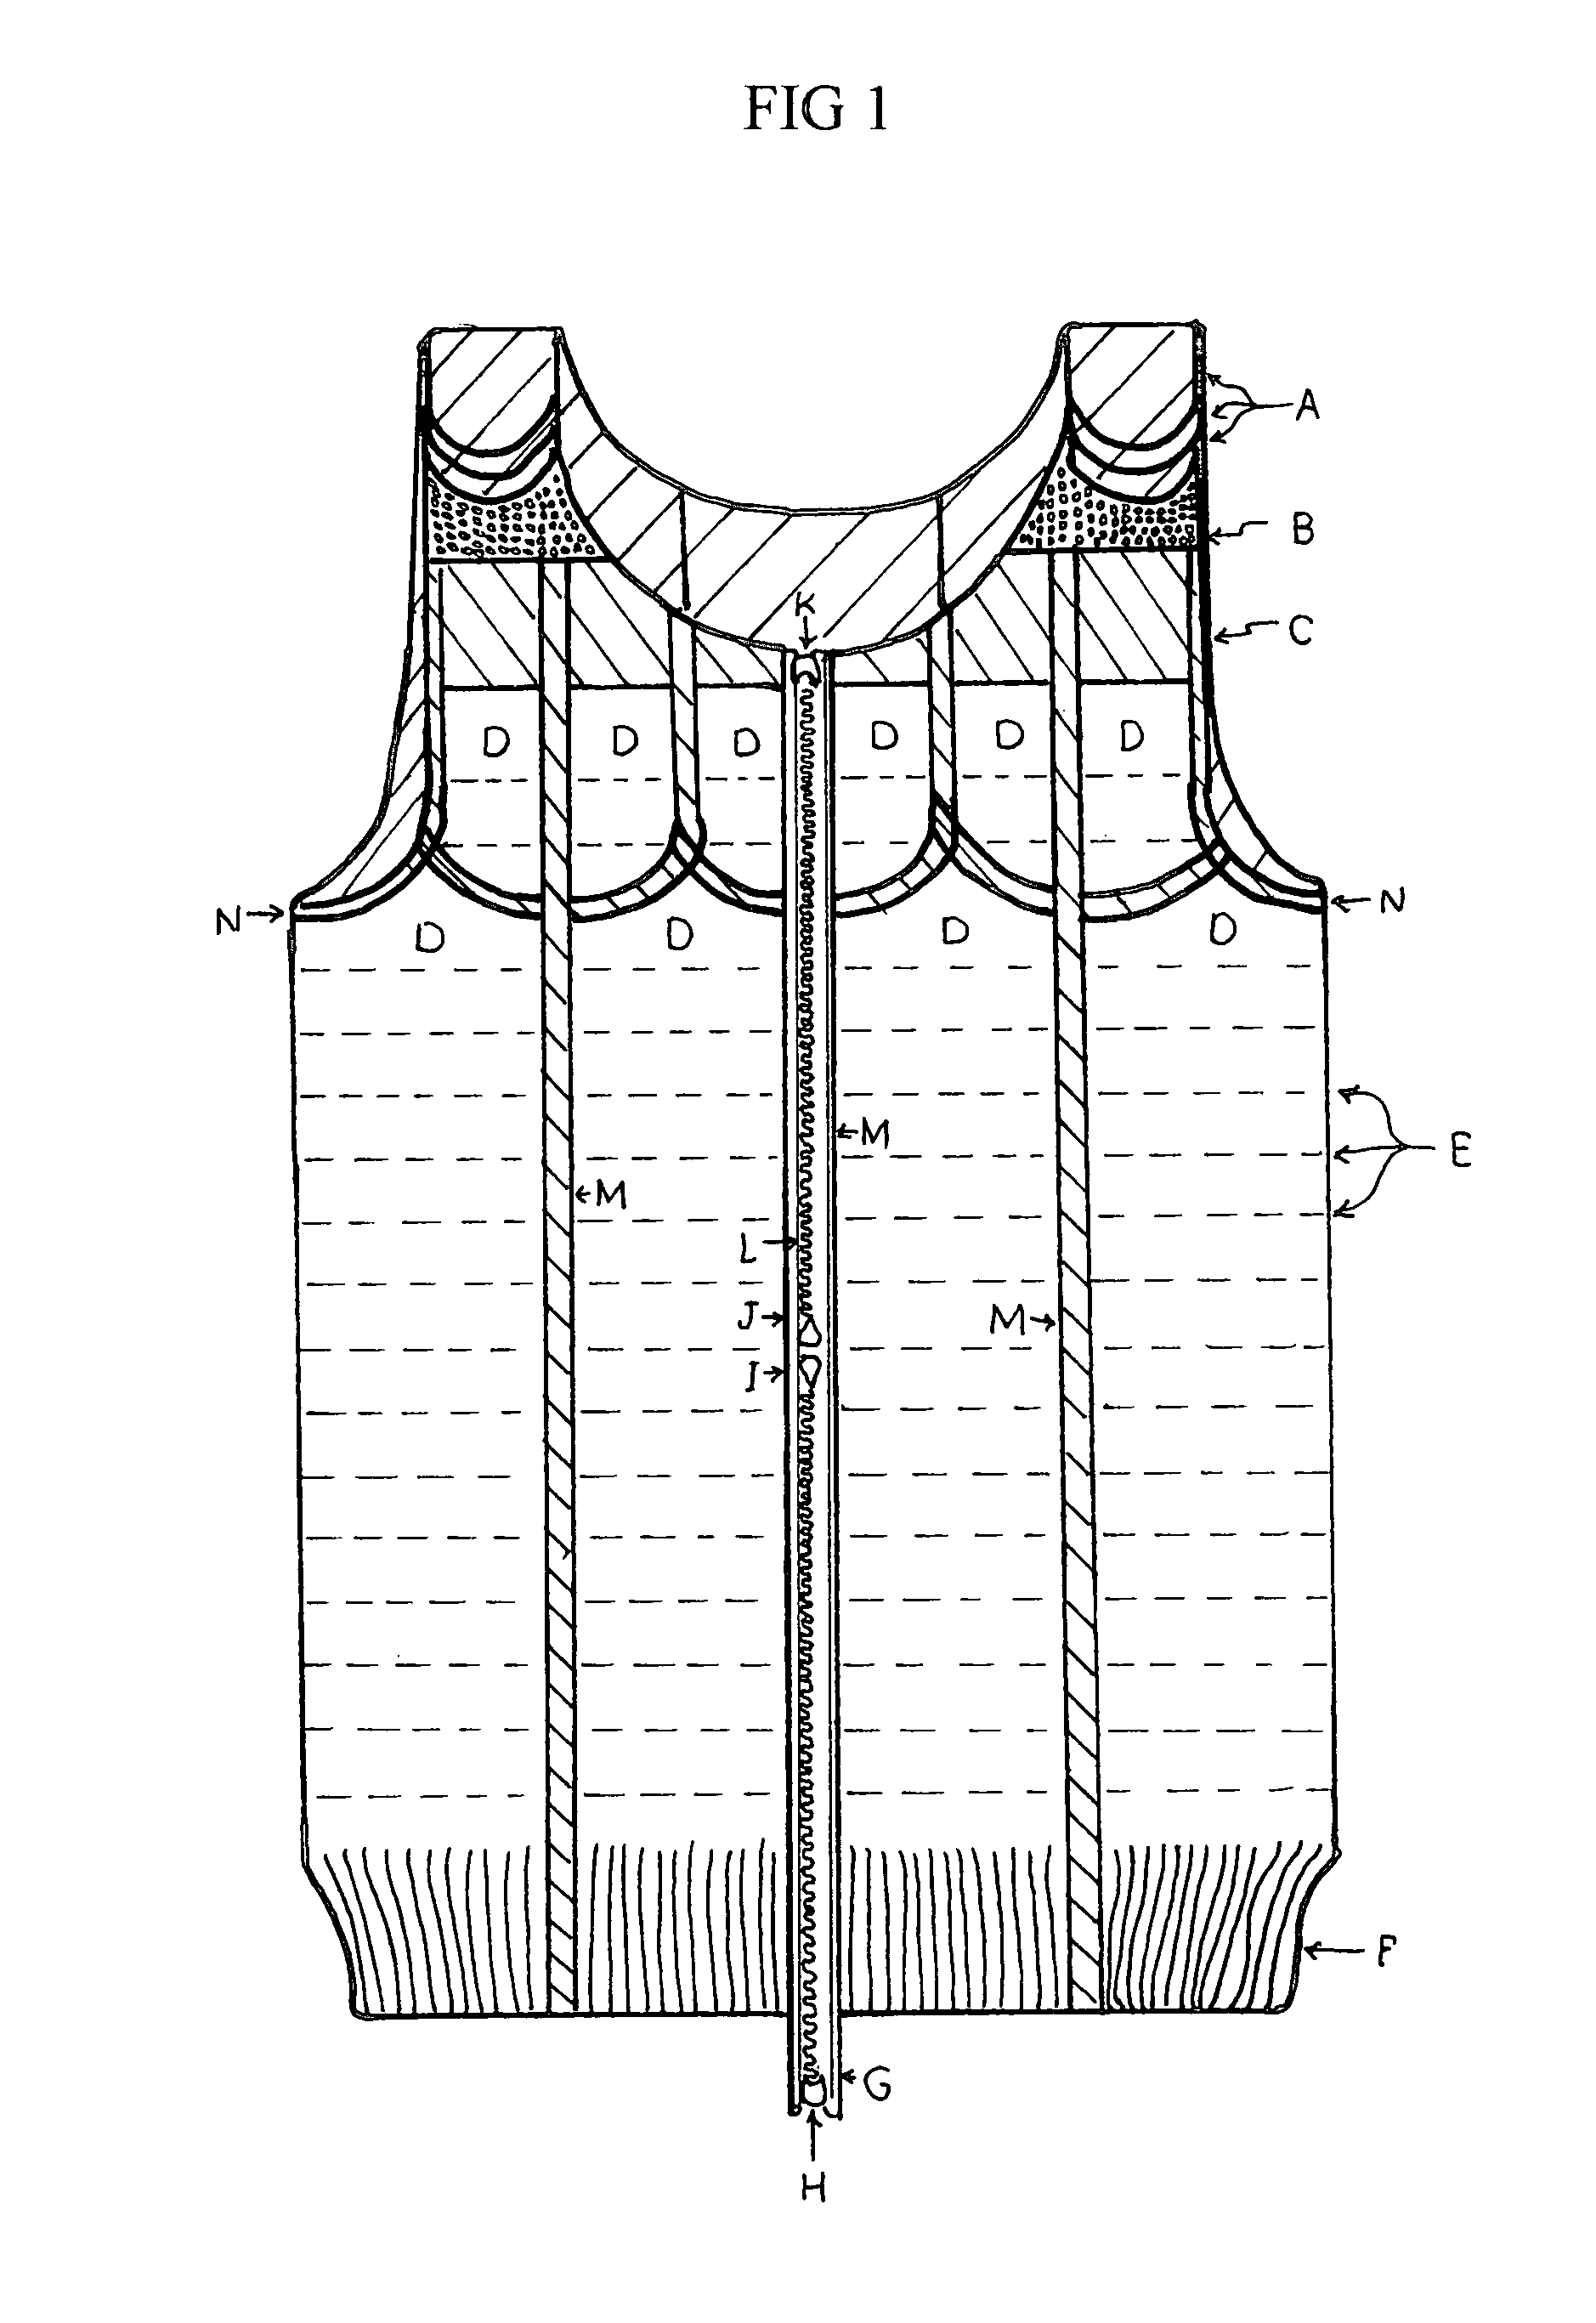 Weaving process for production of a full fashioned woven stretch garment with load carriage capability